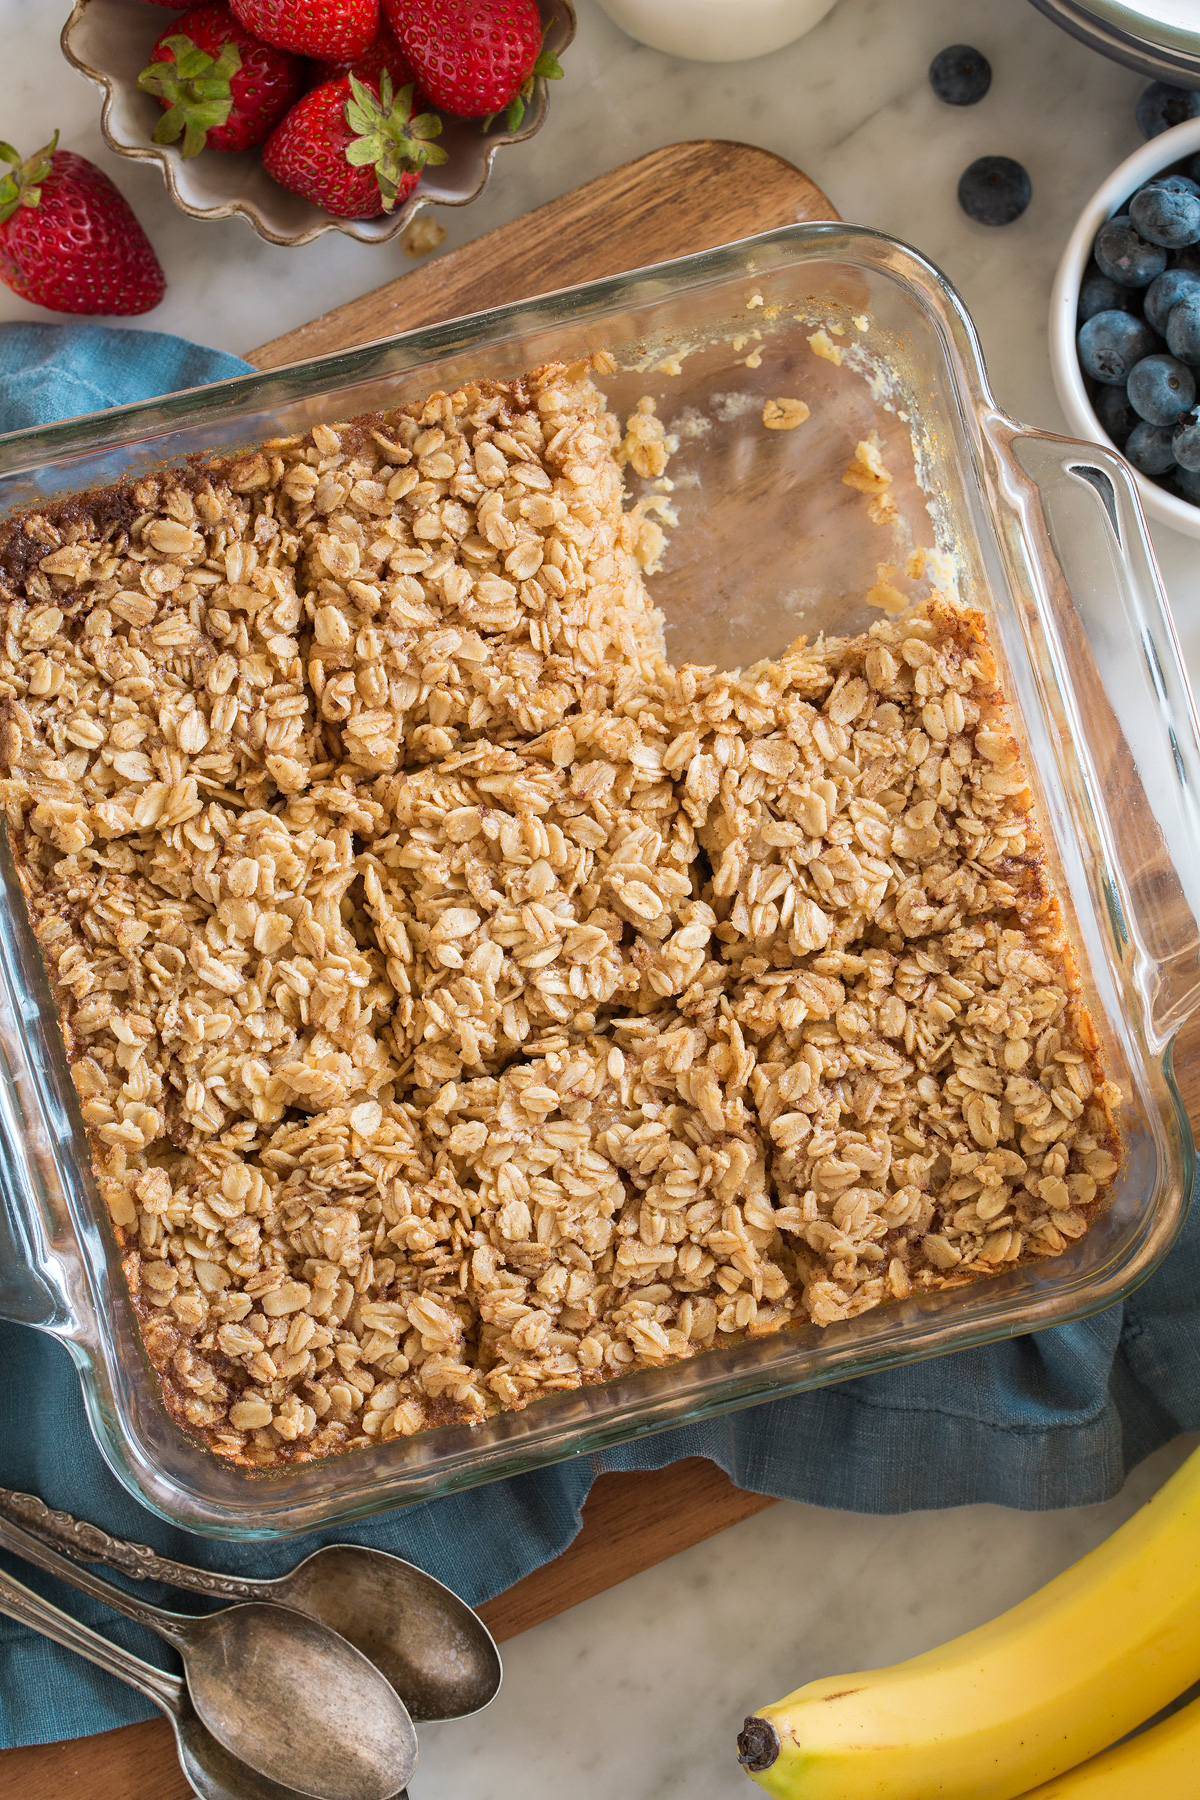 Baked Oatmeal cut into squares